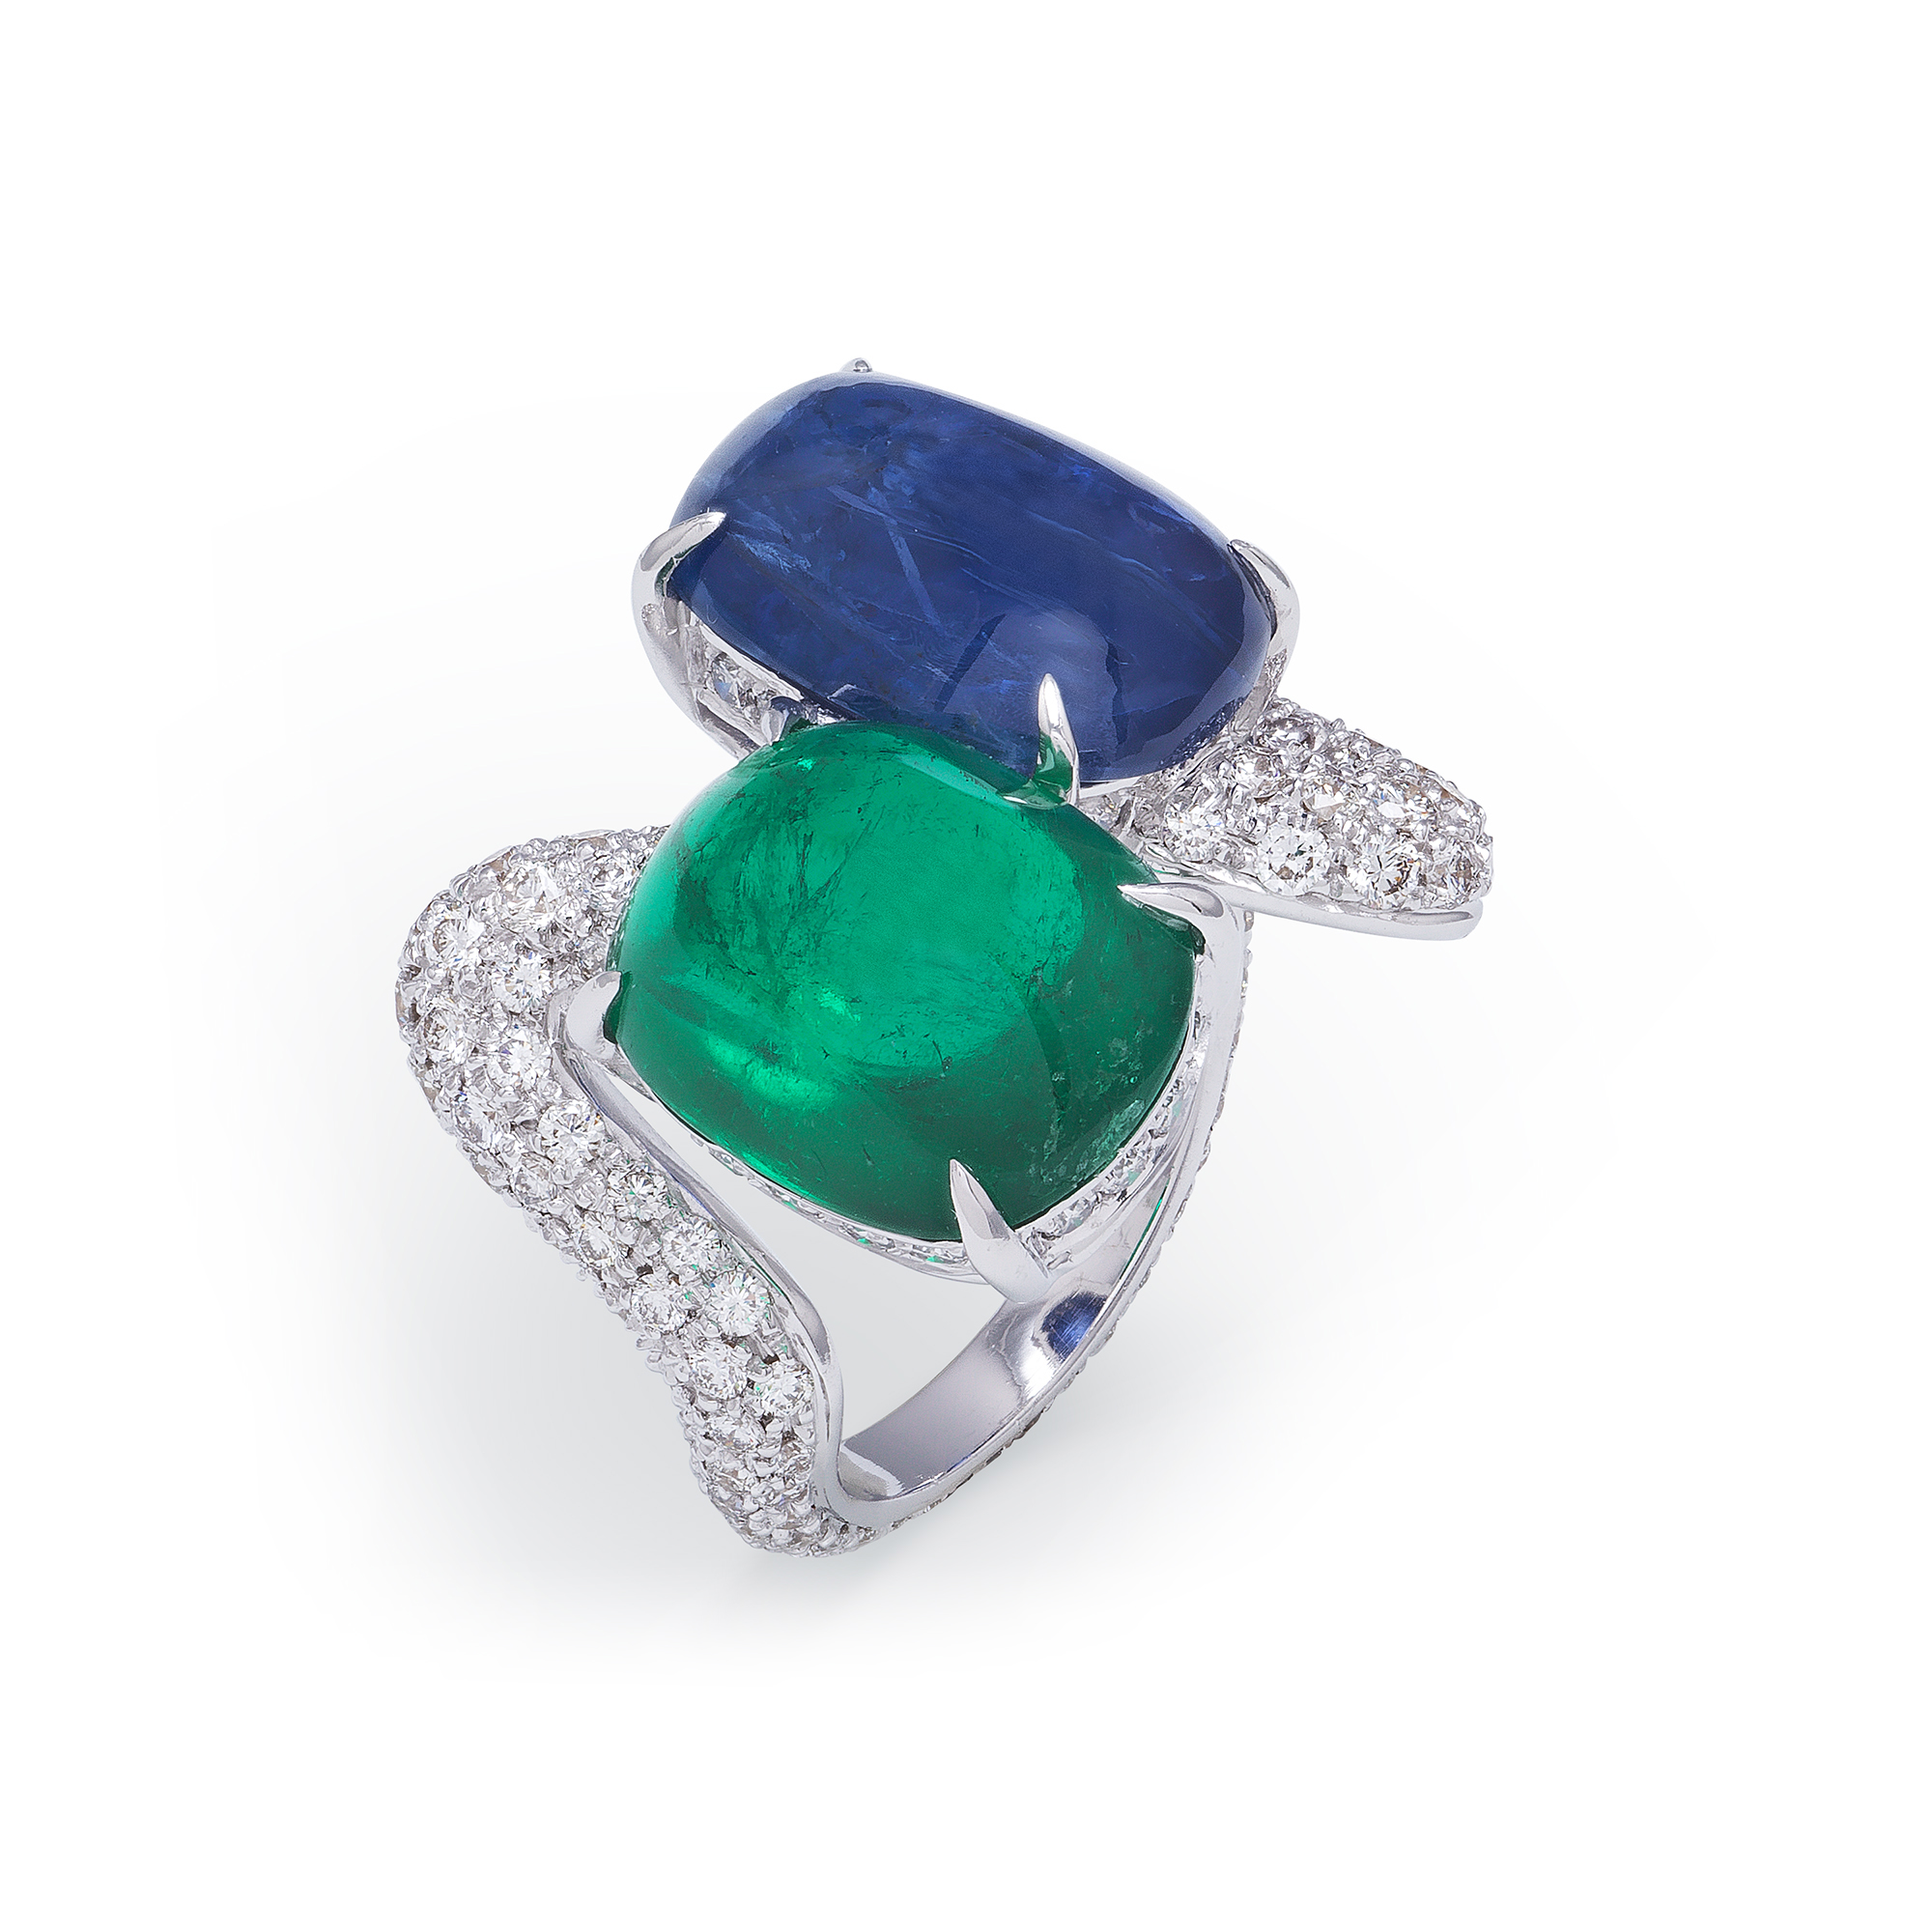 White gold ring with Burma Sapphire, Columbia Emerald and Diamonds